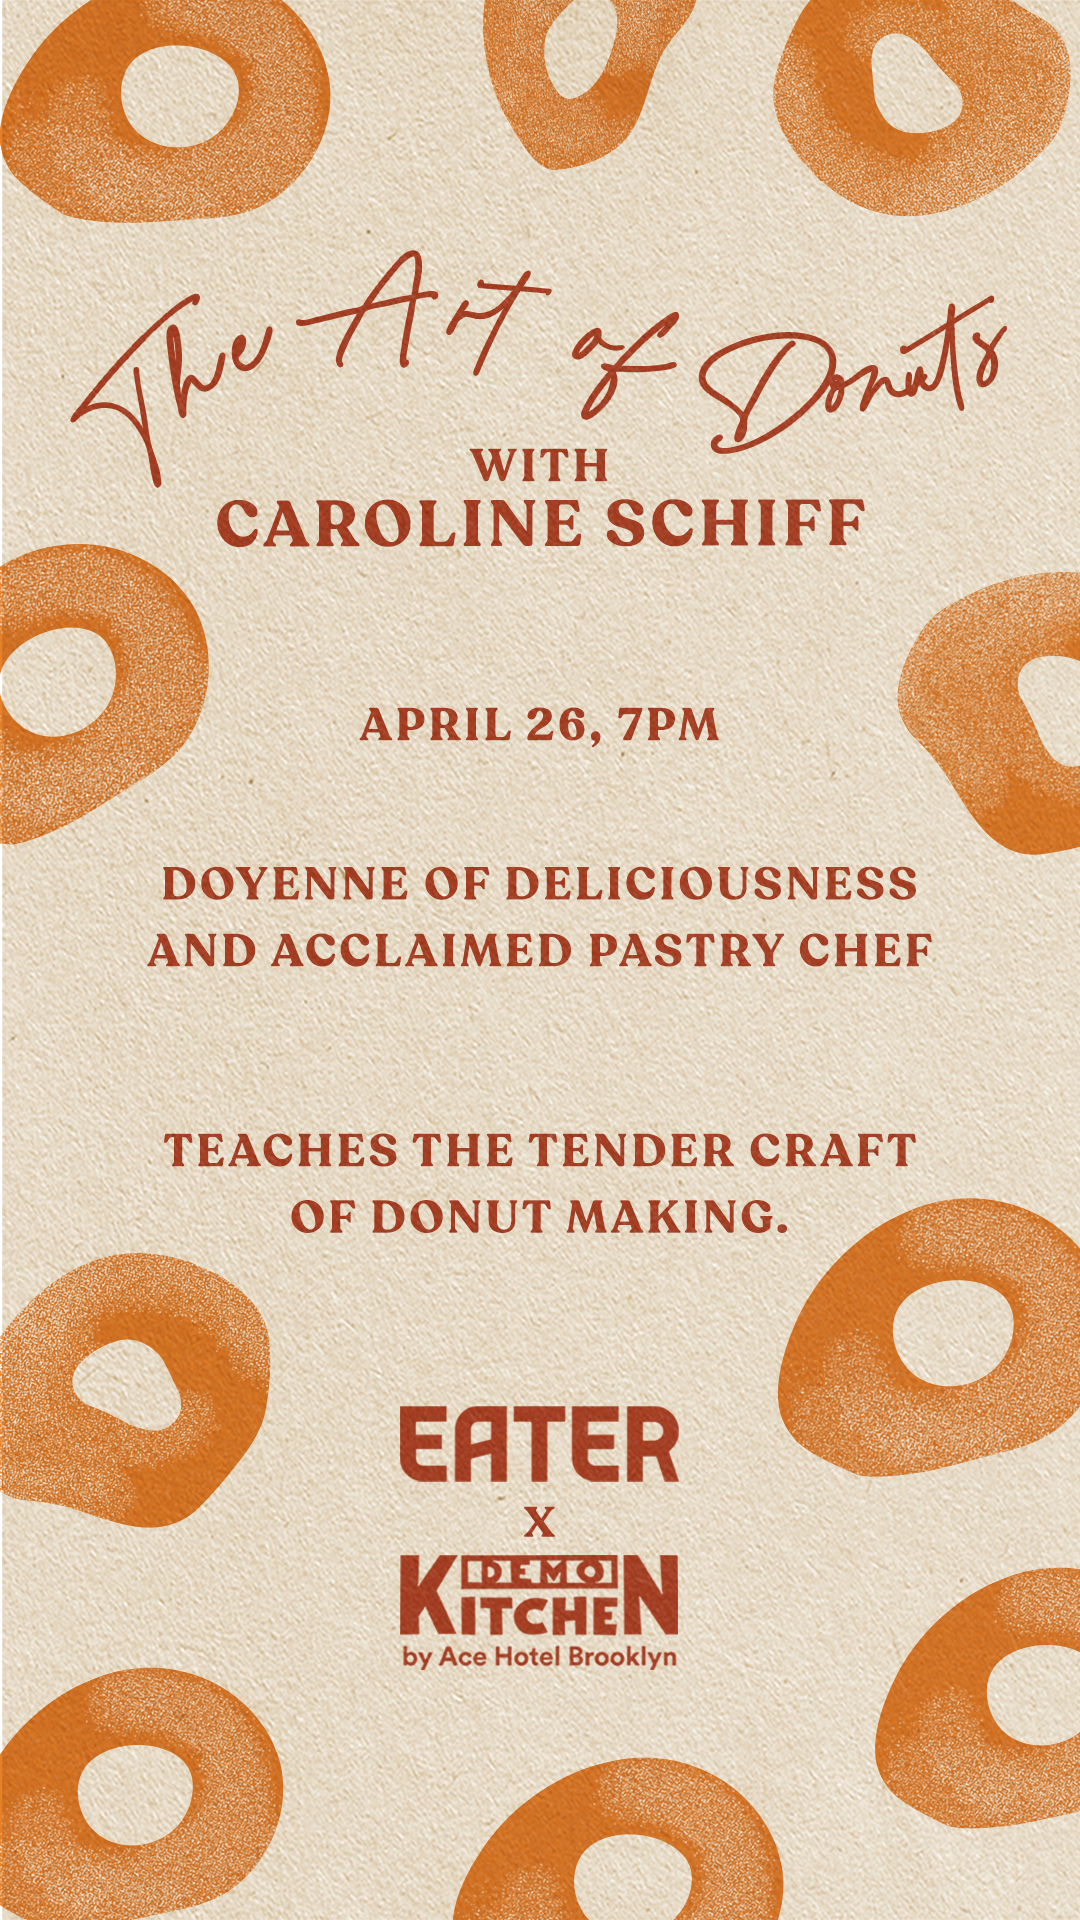 The Art of Donuts event flyer